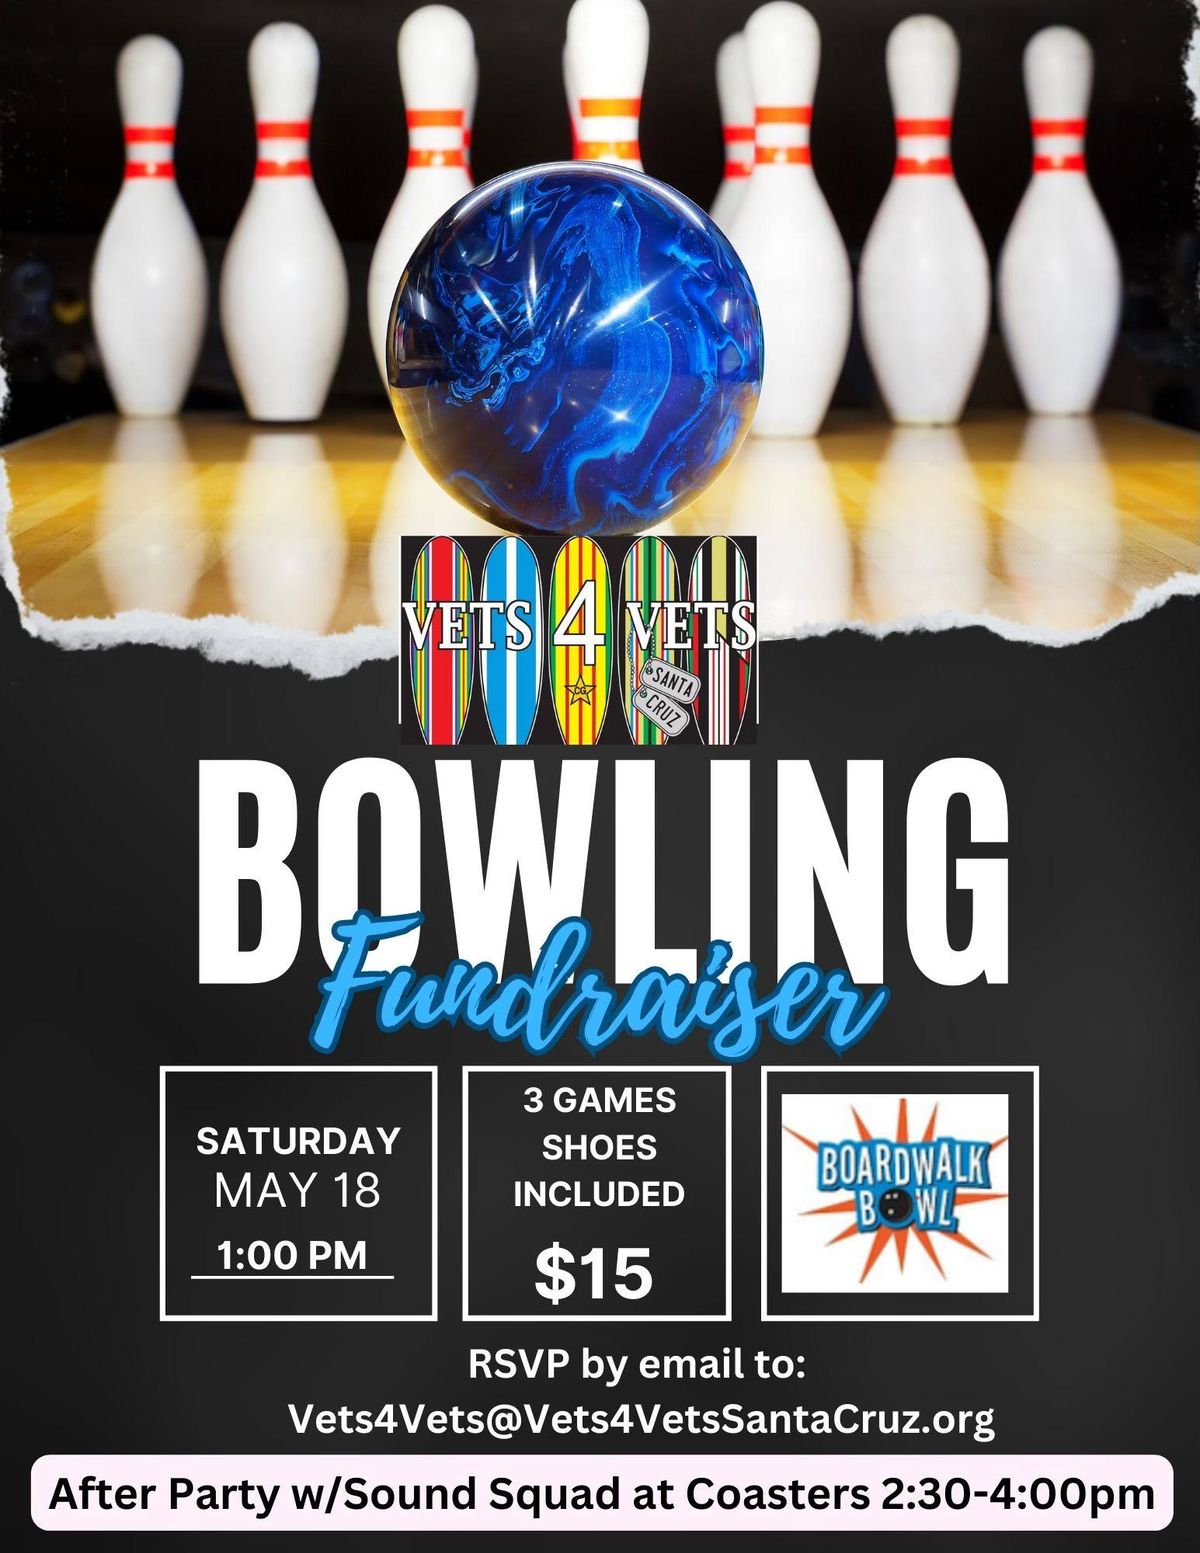 Bowling Fundraiser at Boardwalk Bowl with Sound Squad Party 2:30pm - 4:00pm @ Coasters